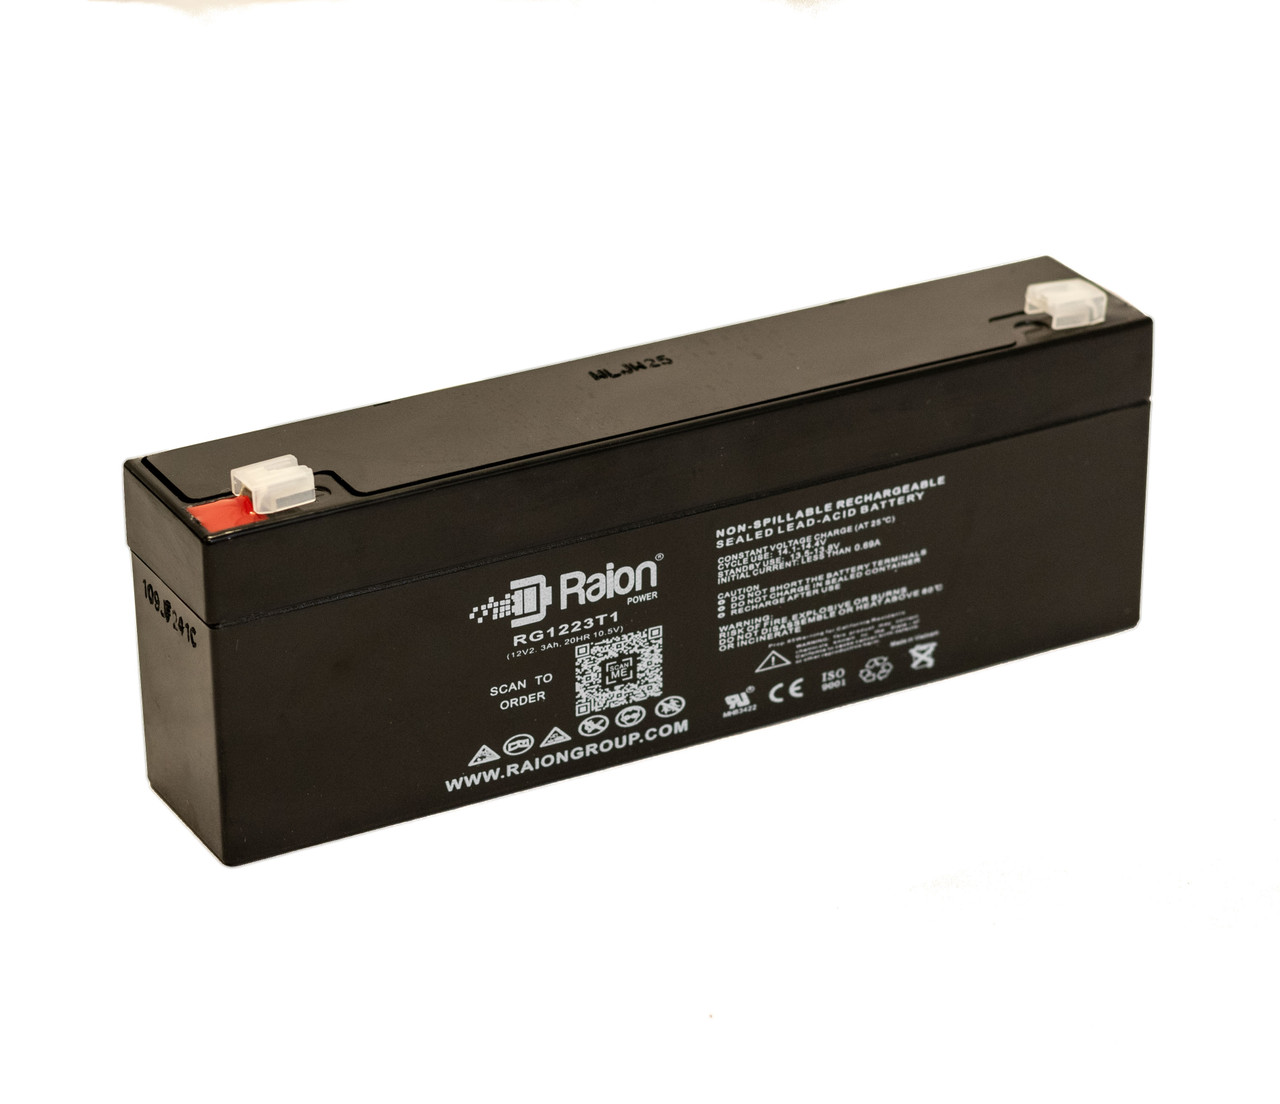 Raion Power RG1223T1 Replacement Battery for Criticare Systems 507ER VSM